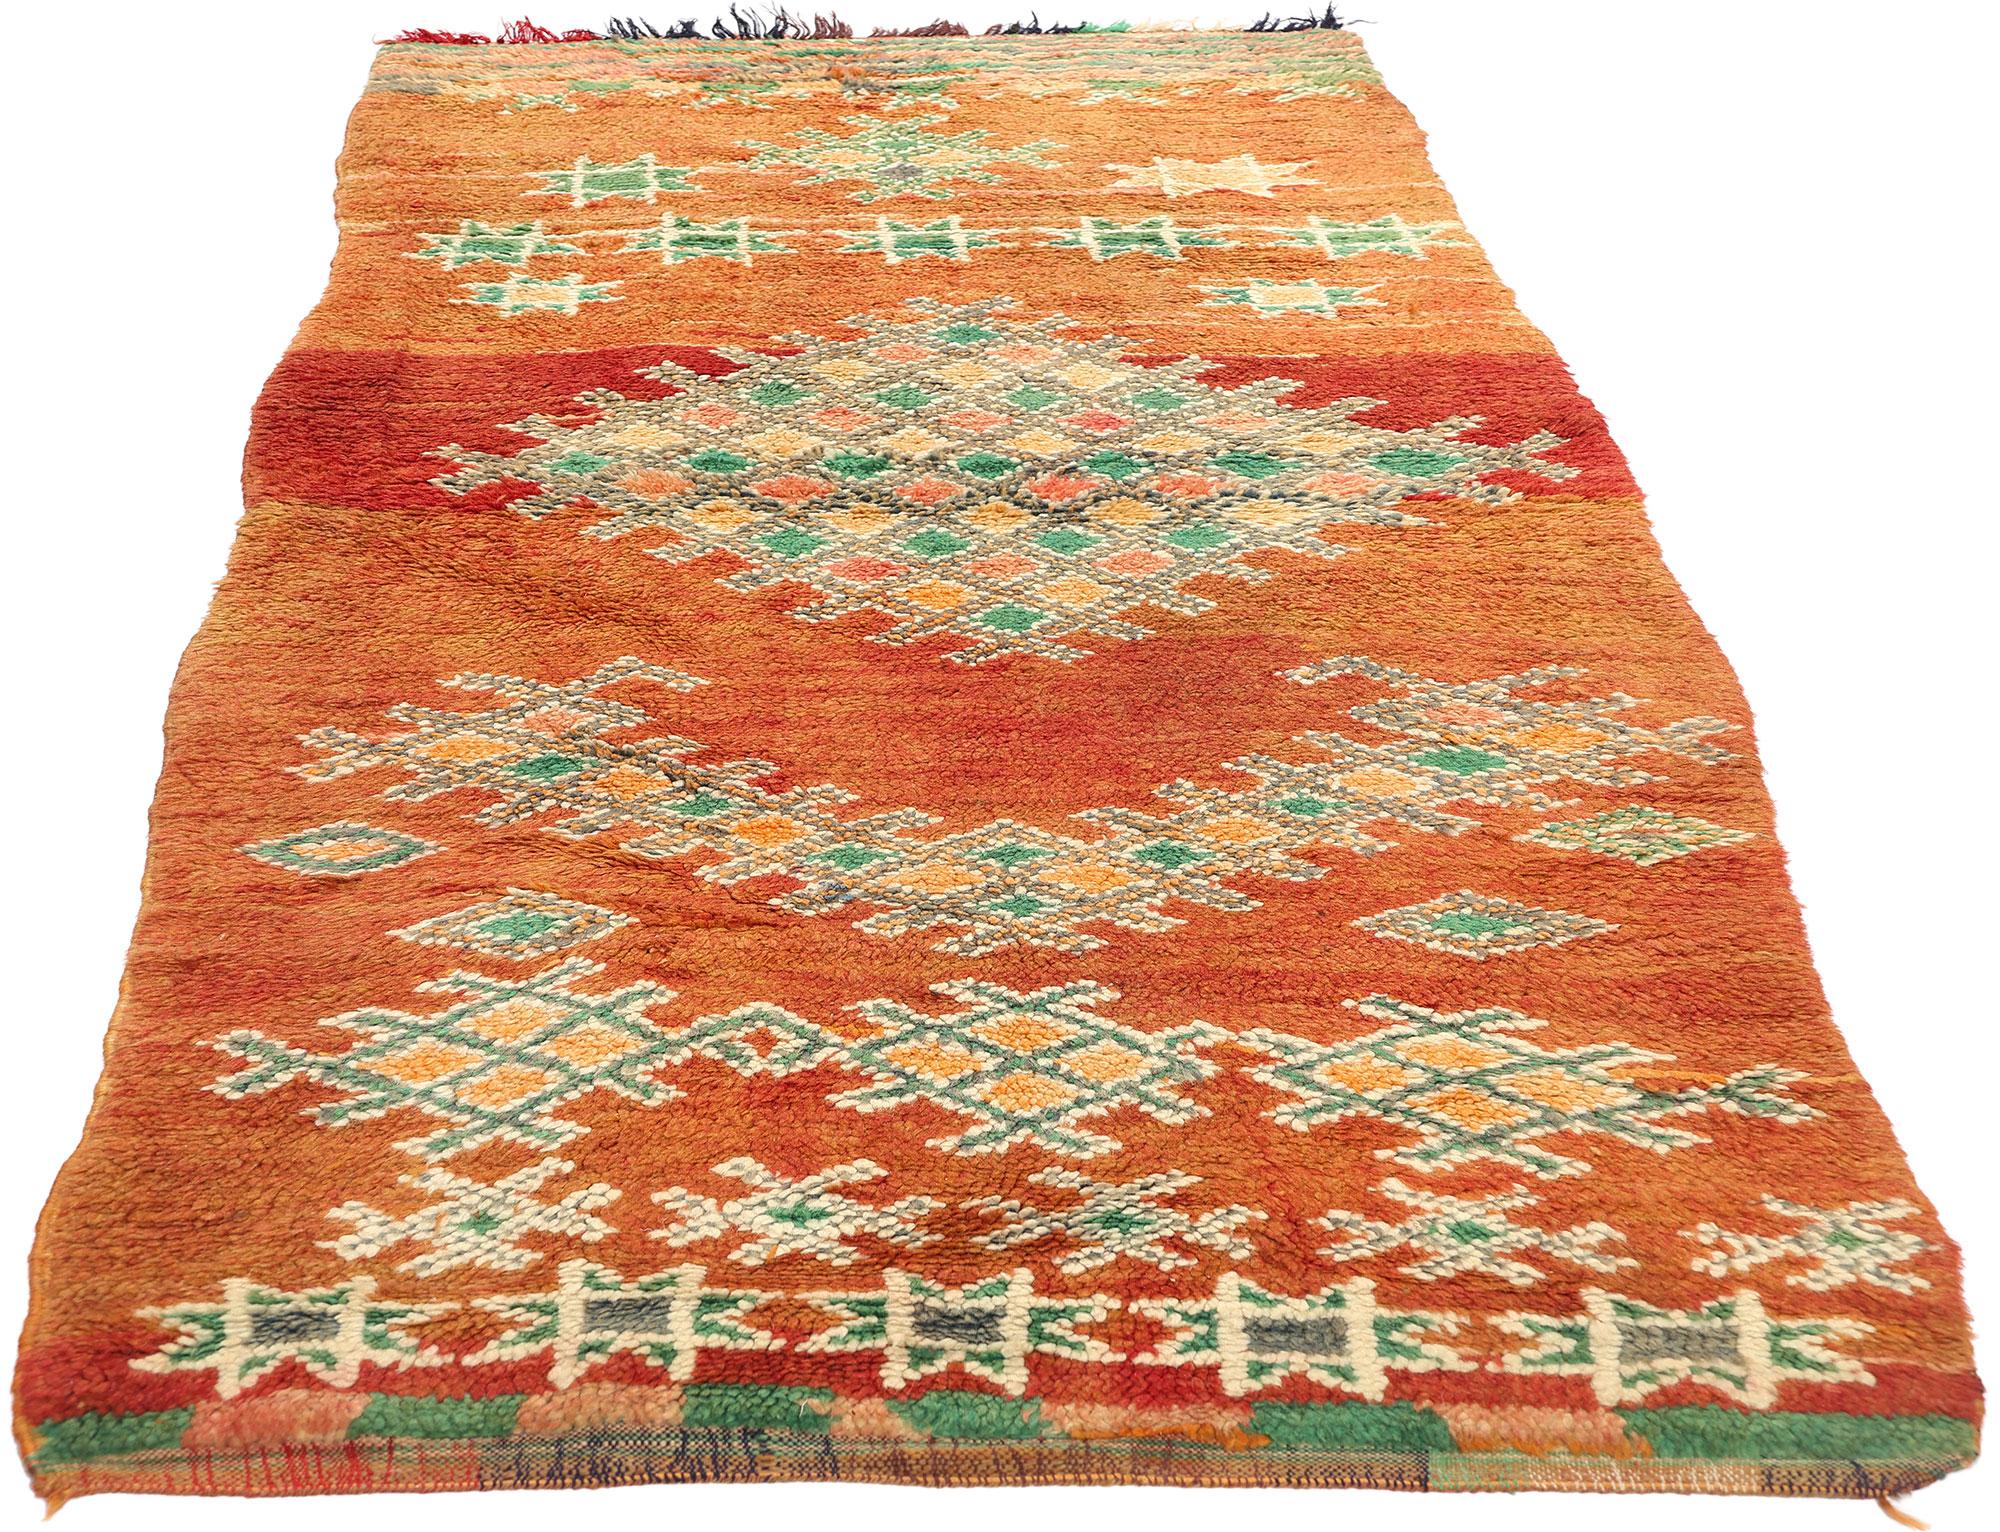 Tribal Vintage Boujad Moroccan Rug, Cozy Nomad Meets Southwest Bohemian For Sale